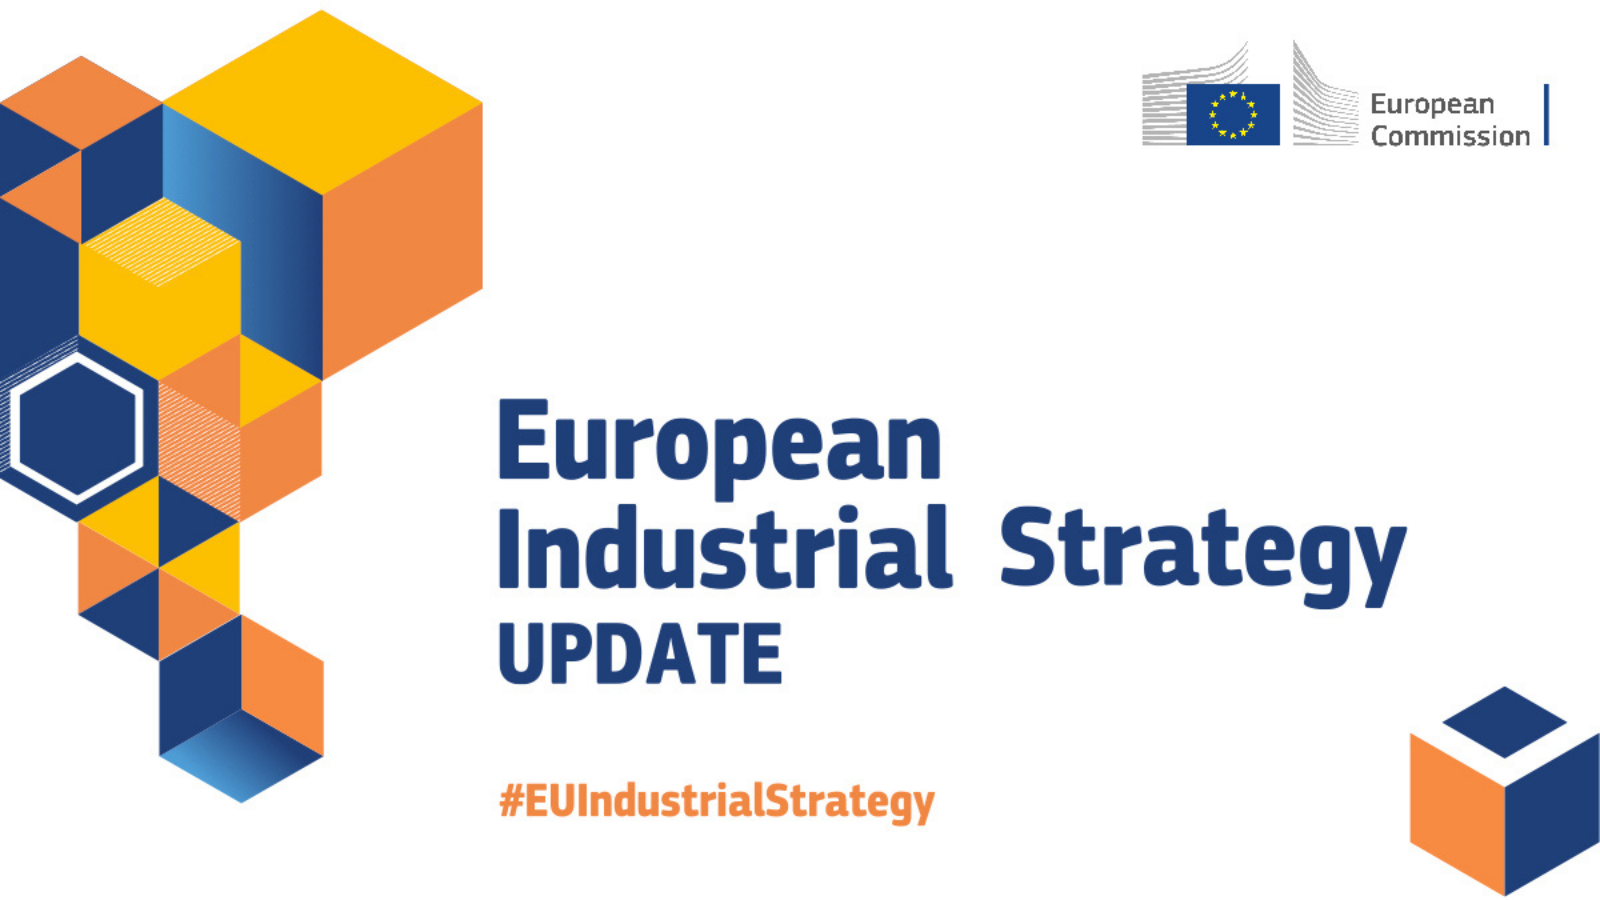 Updated EU industrial strategy must deliver concrete answers to workers’ demands